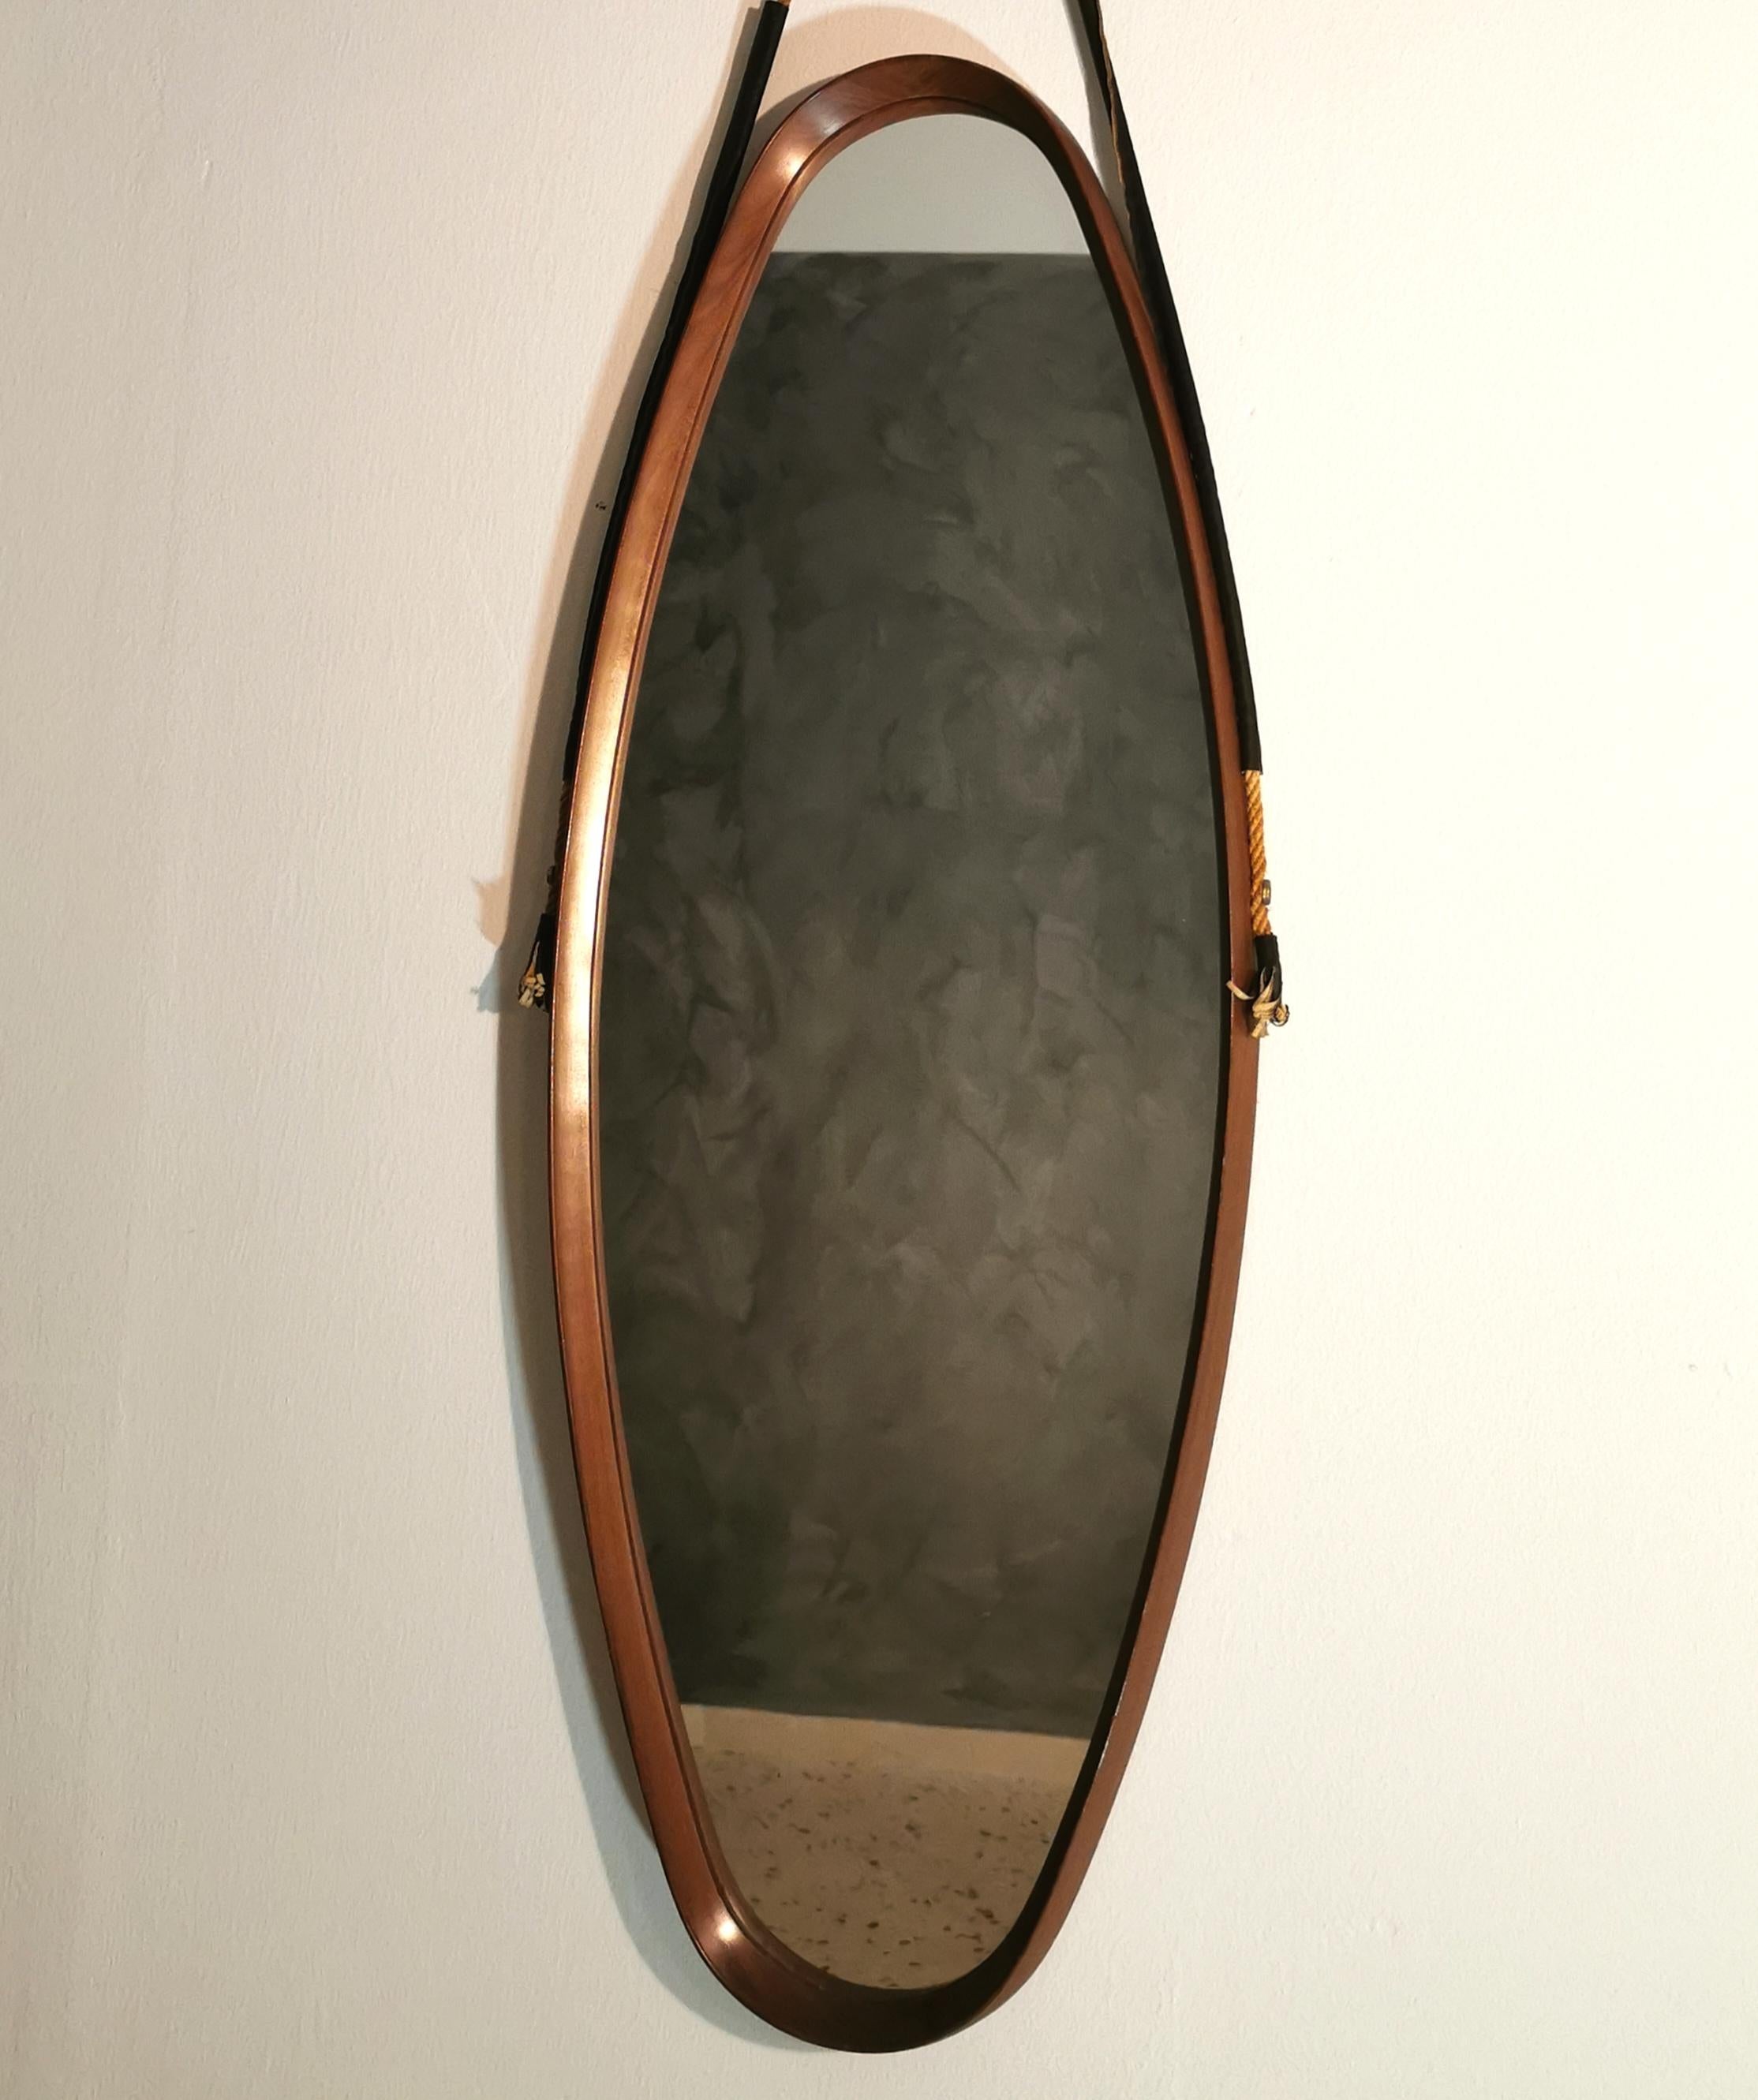 Particular 60 'oval-shaped mirror in teak, with rope support, Italian production.